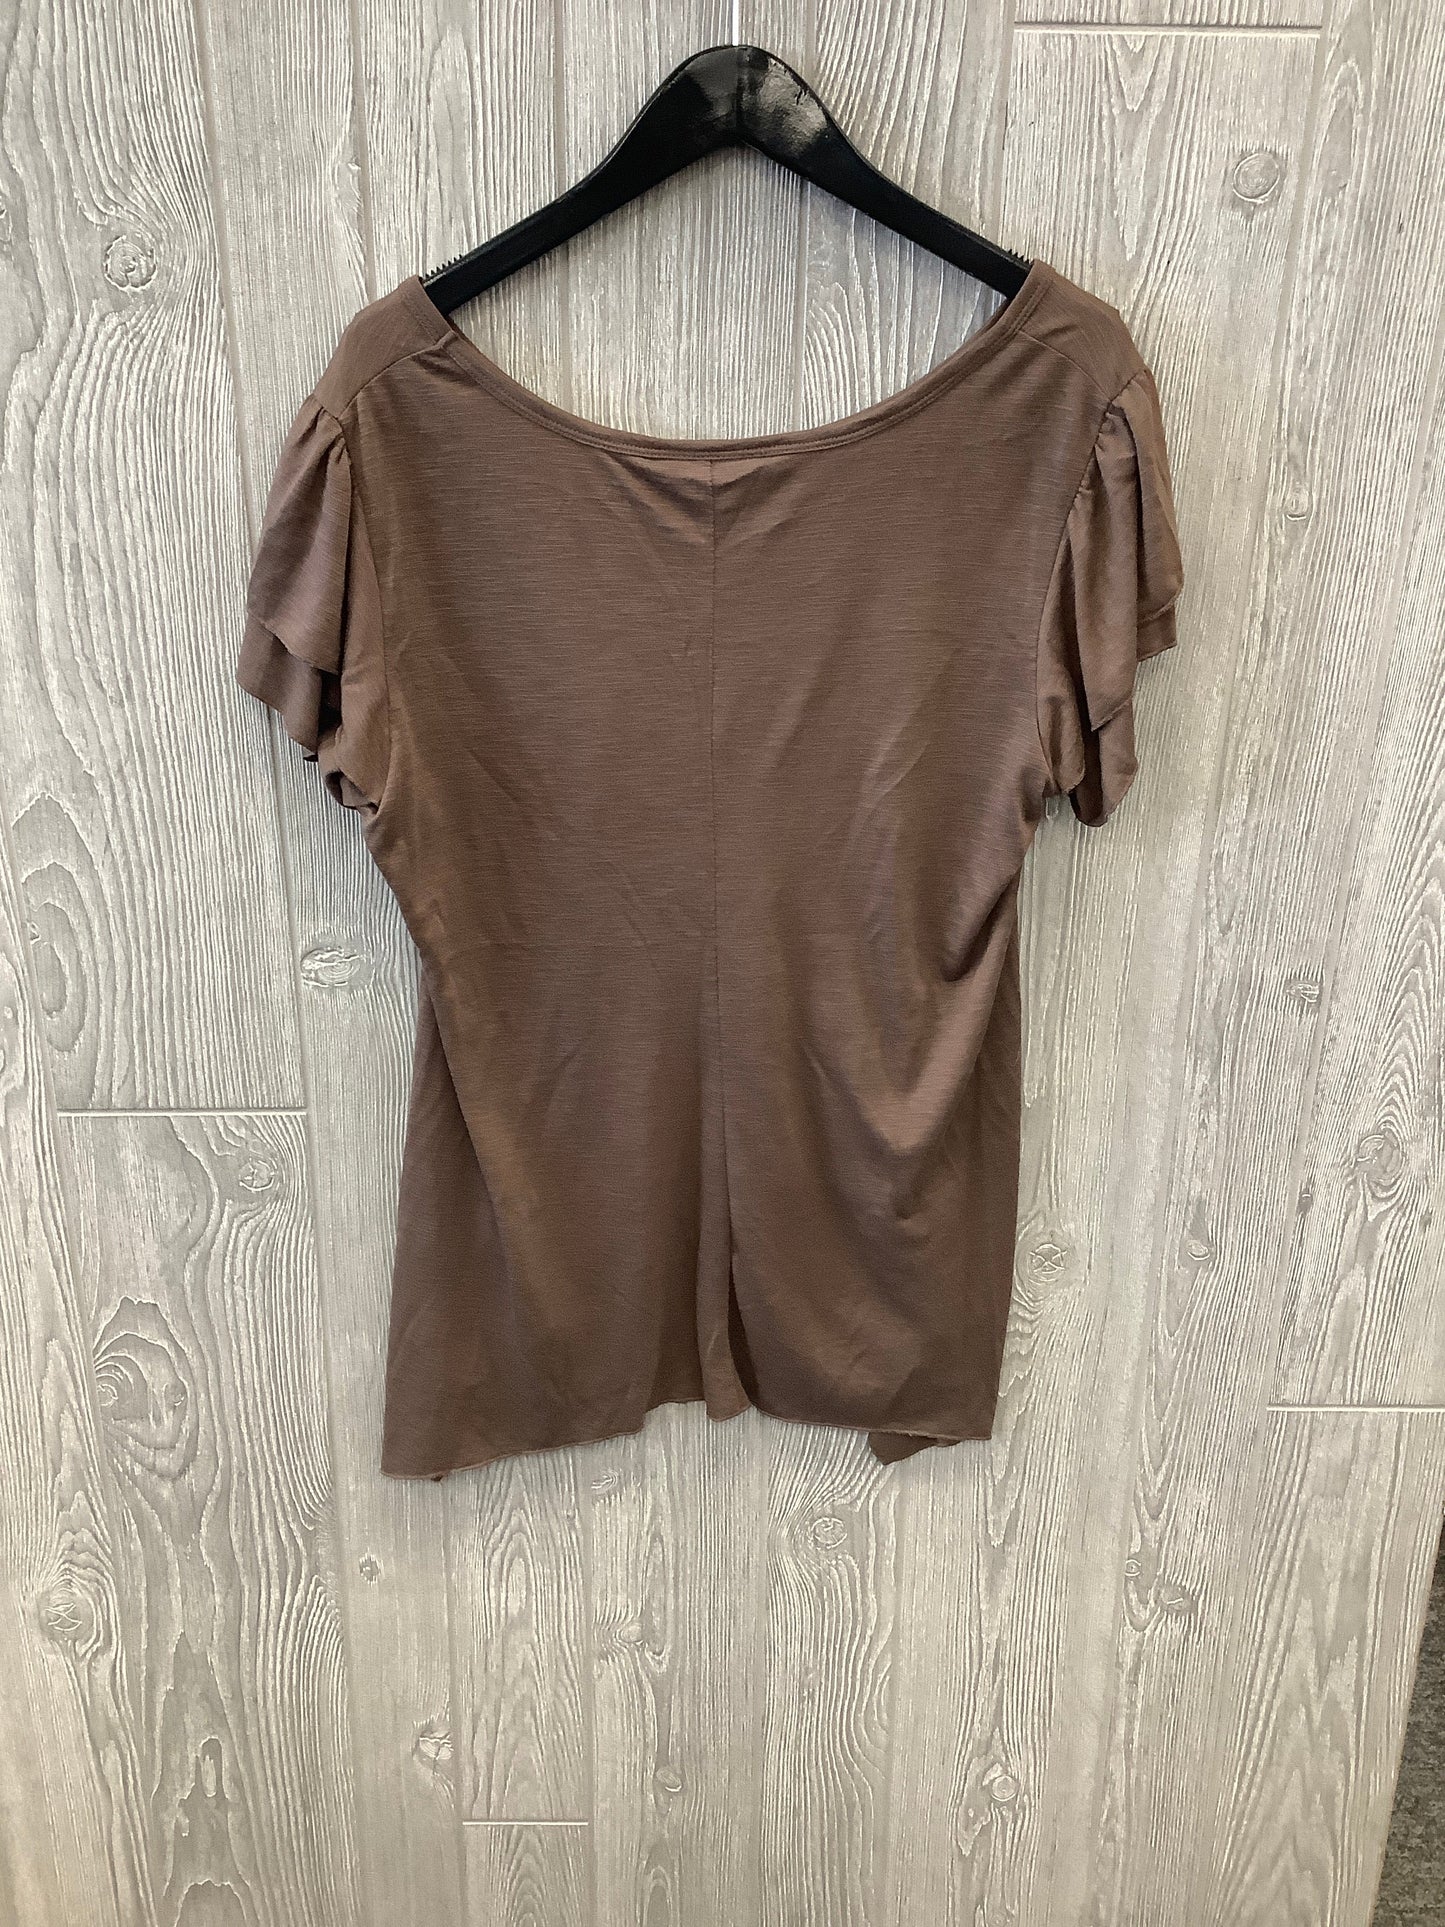 Brown Top Short Sleeve Style And Company, Size 1x